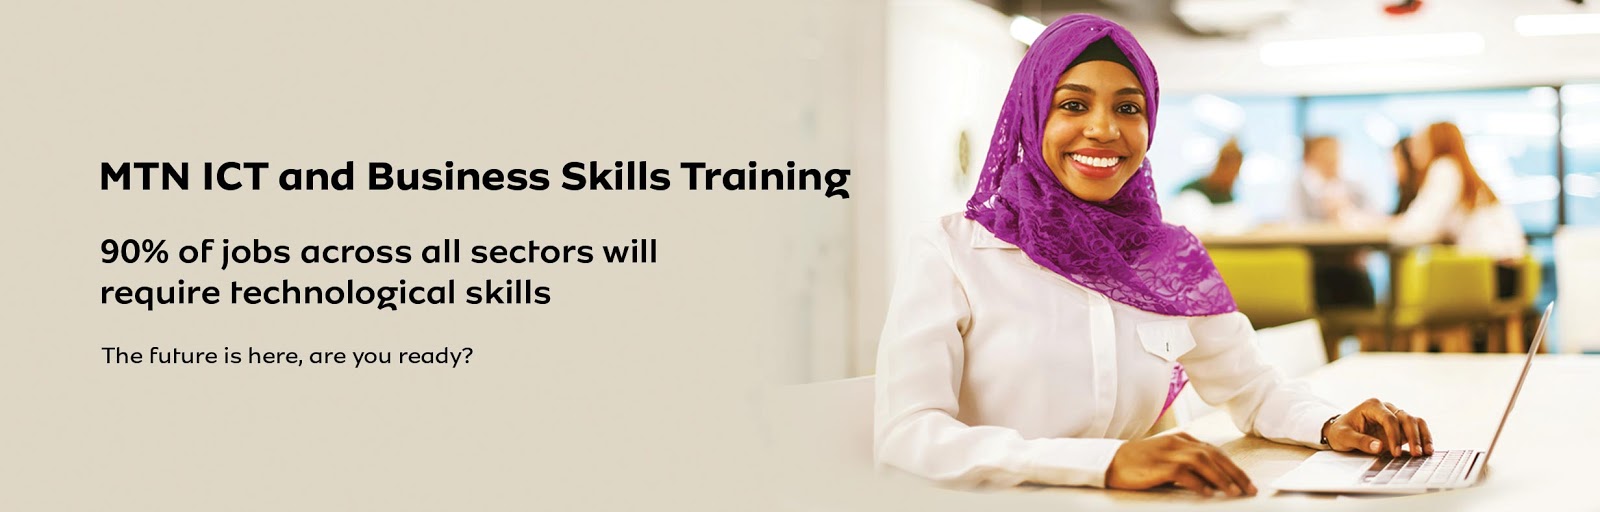 Hurry up and register for MTN ICT and Business Skills Training